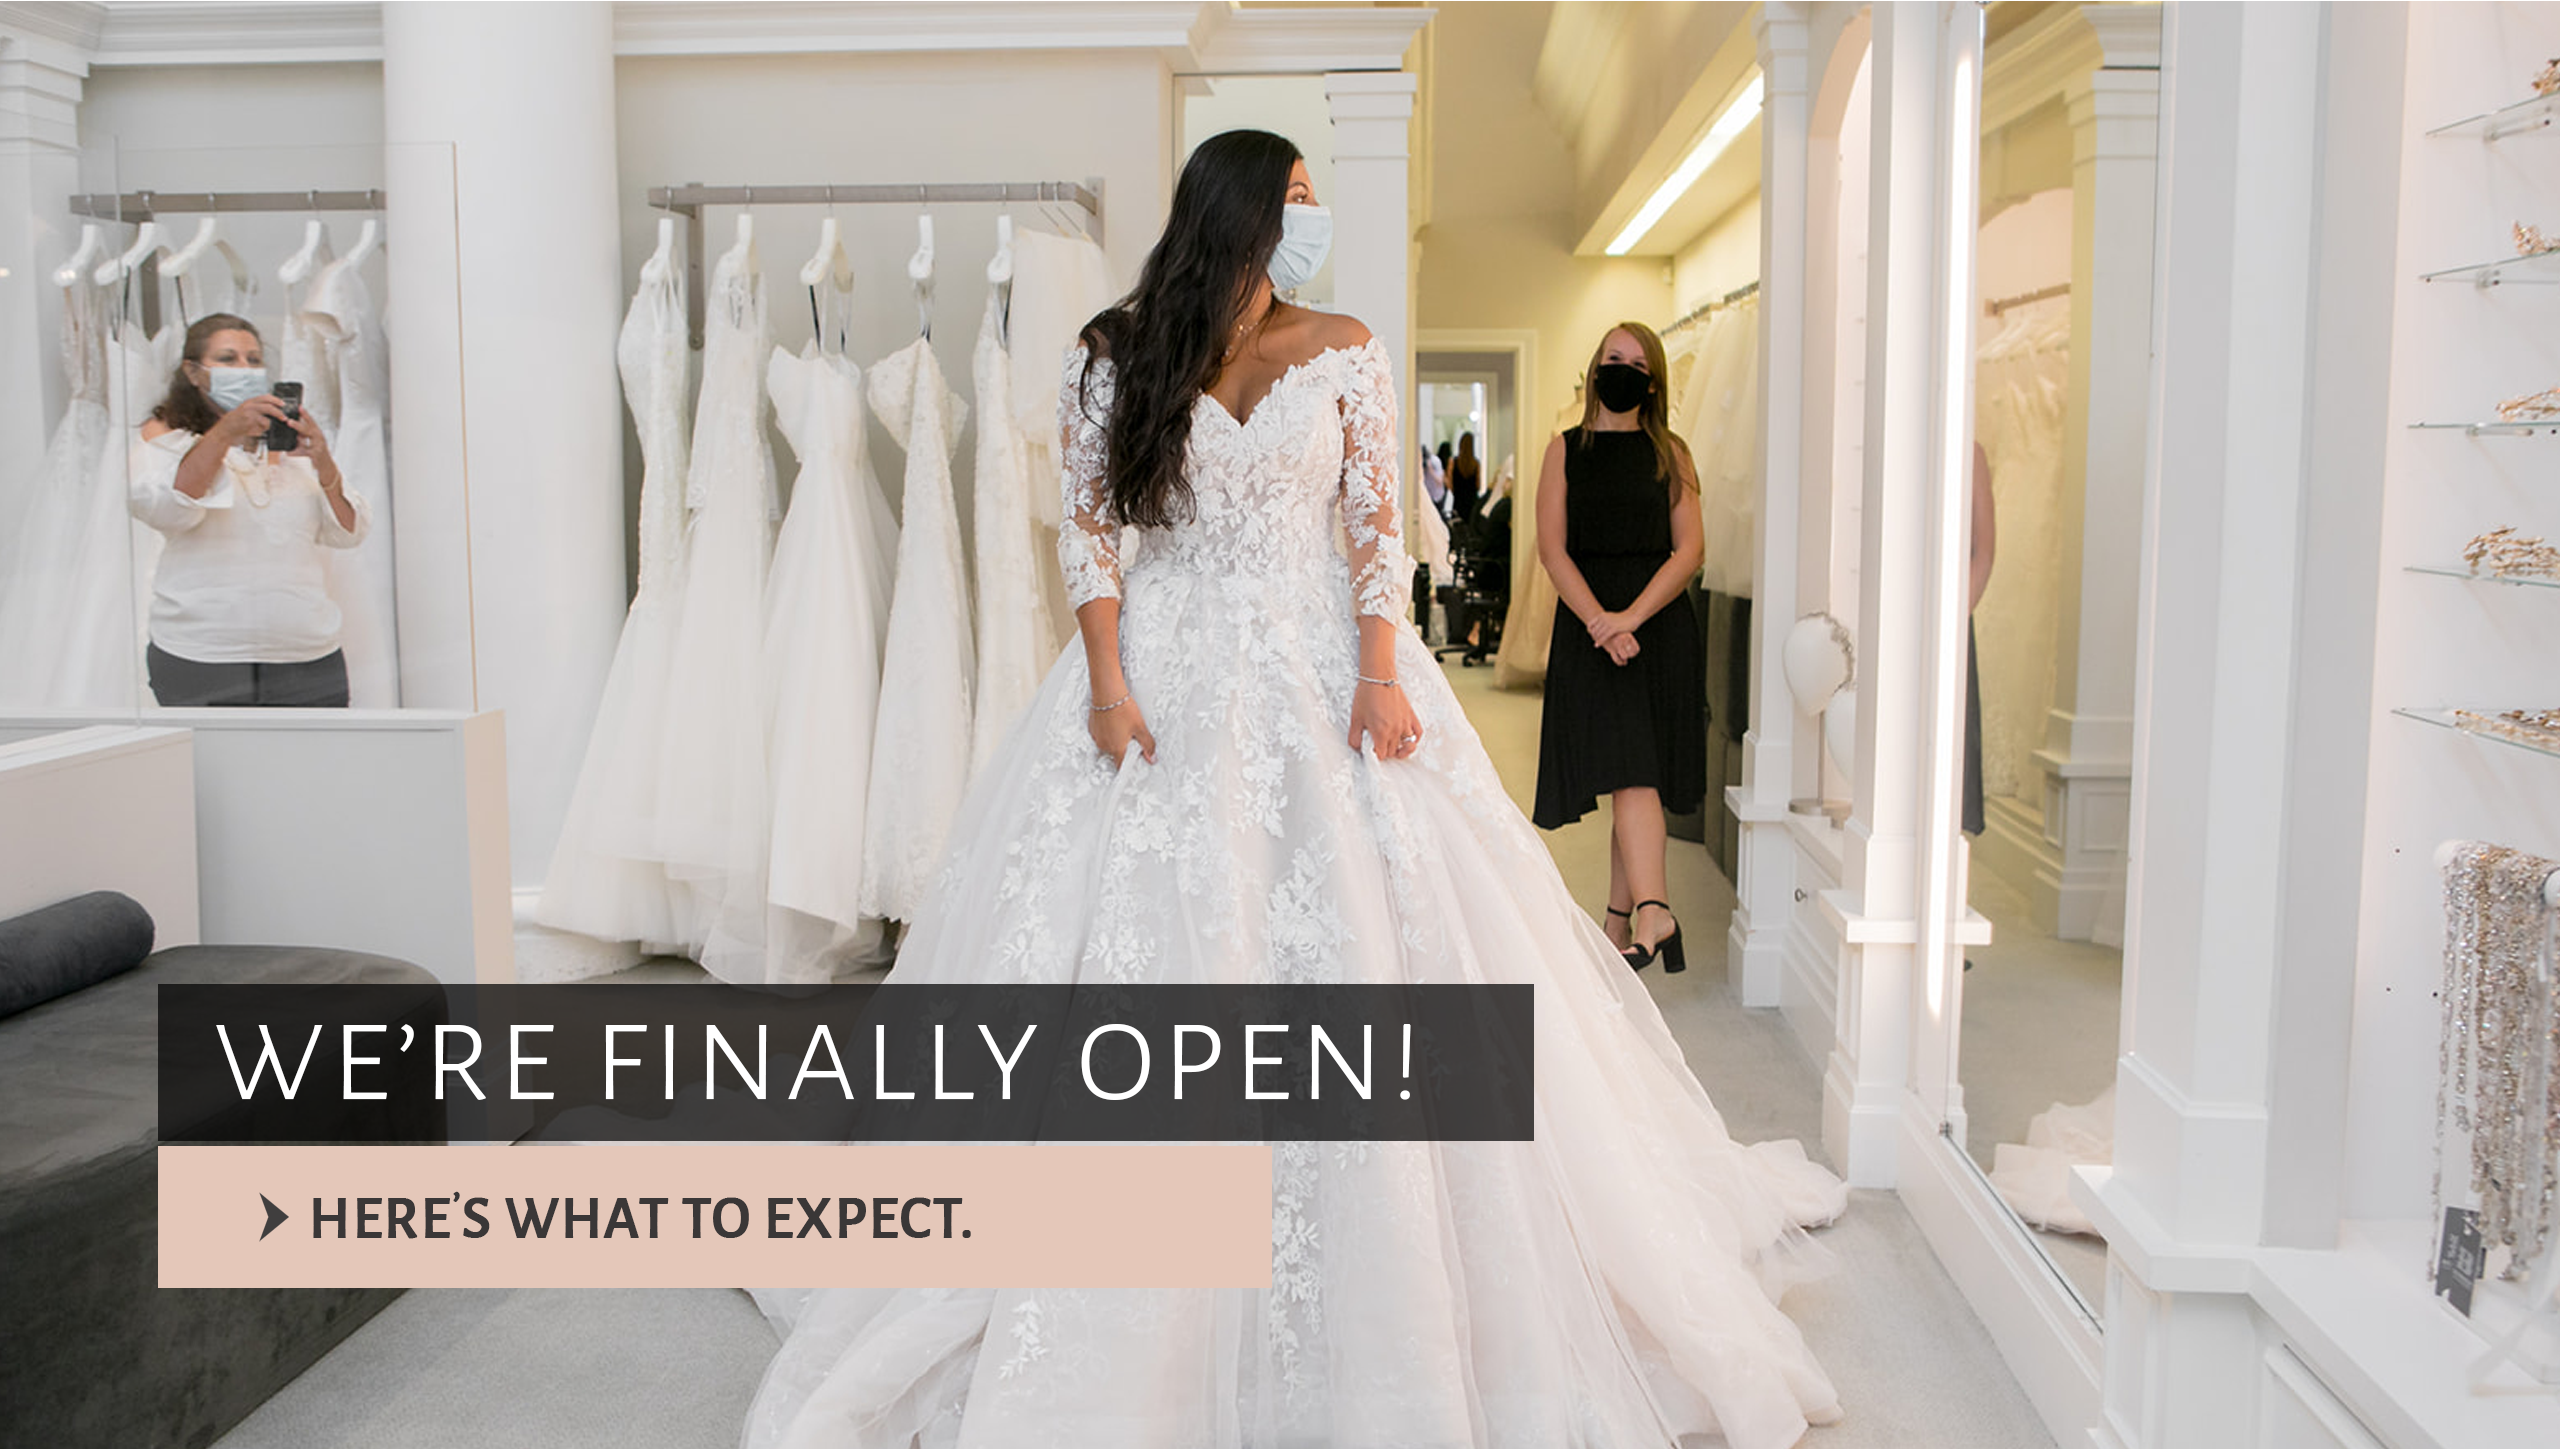 Kleinfeld Bridal The Largest Selection Of Wedding Dresses In The World,Modern House Interior Design Ideas Philippines